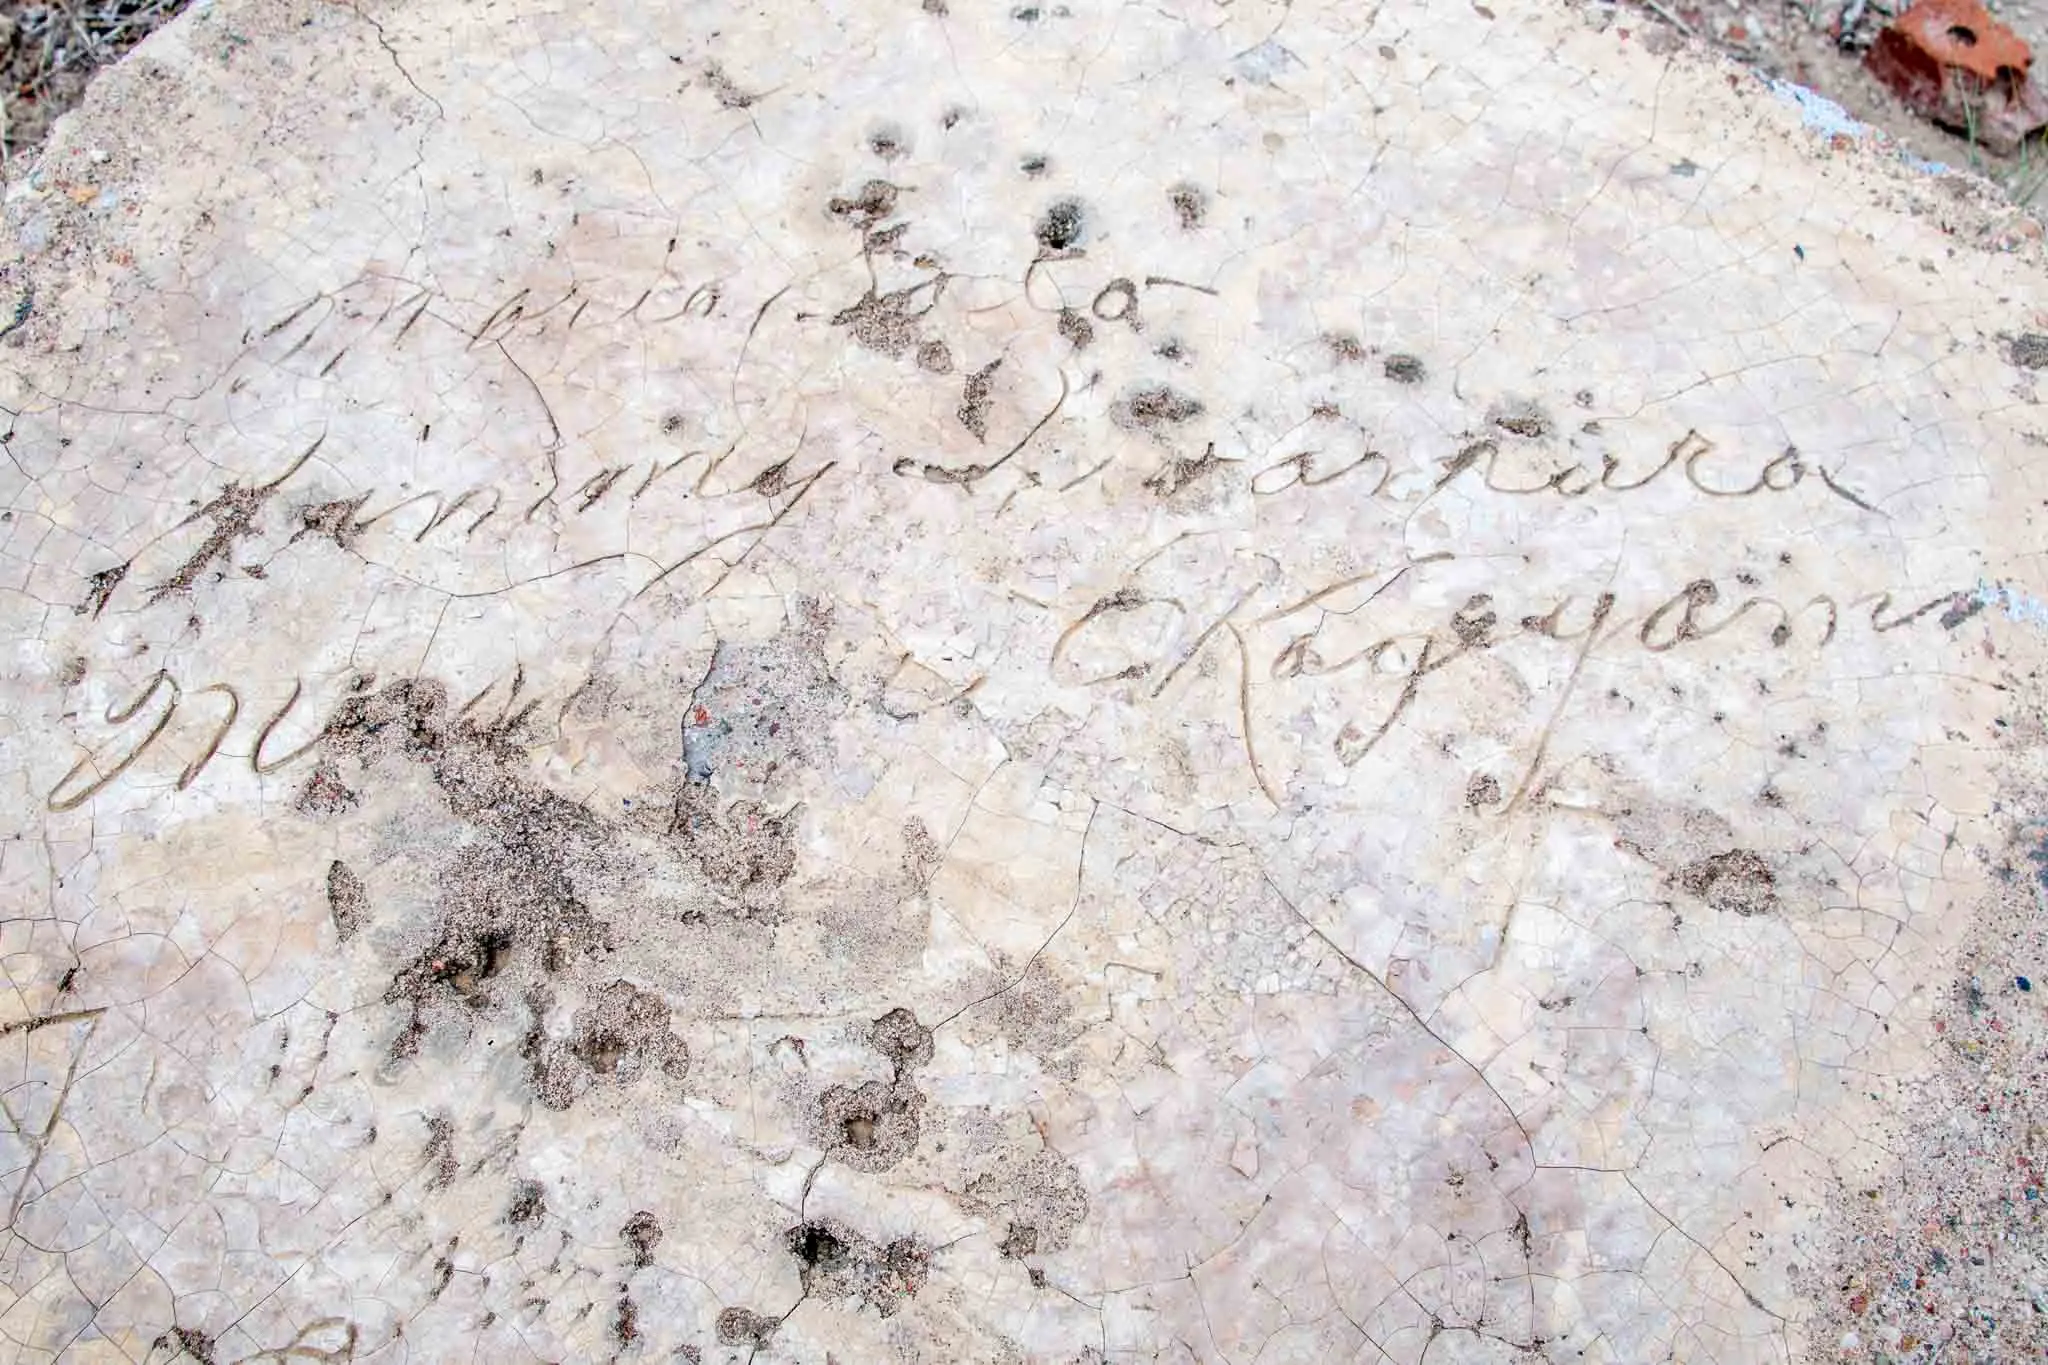 Names of prisoners signed into concrete at Camp Amache